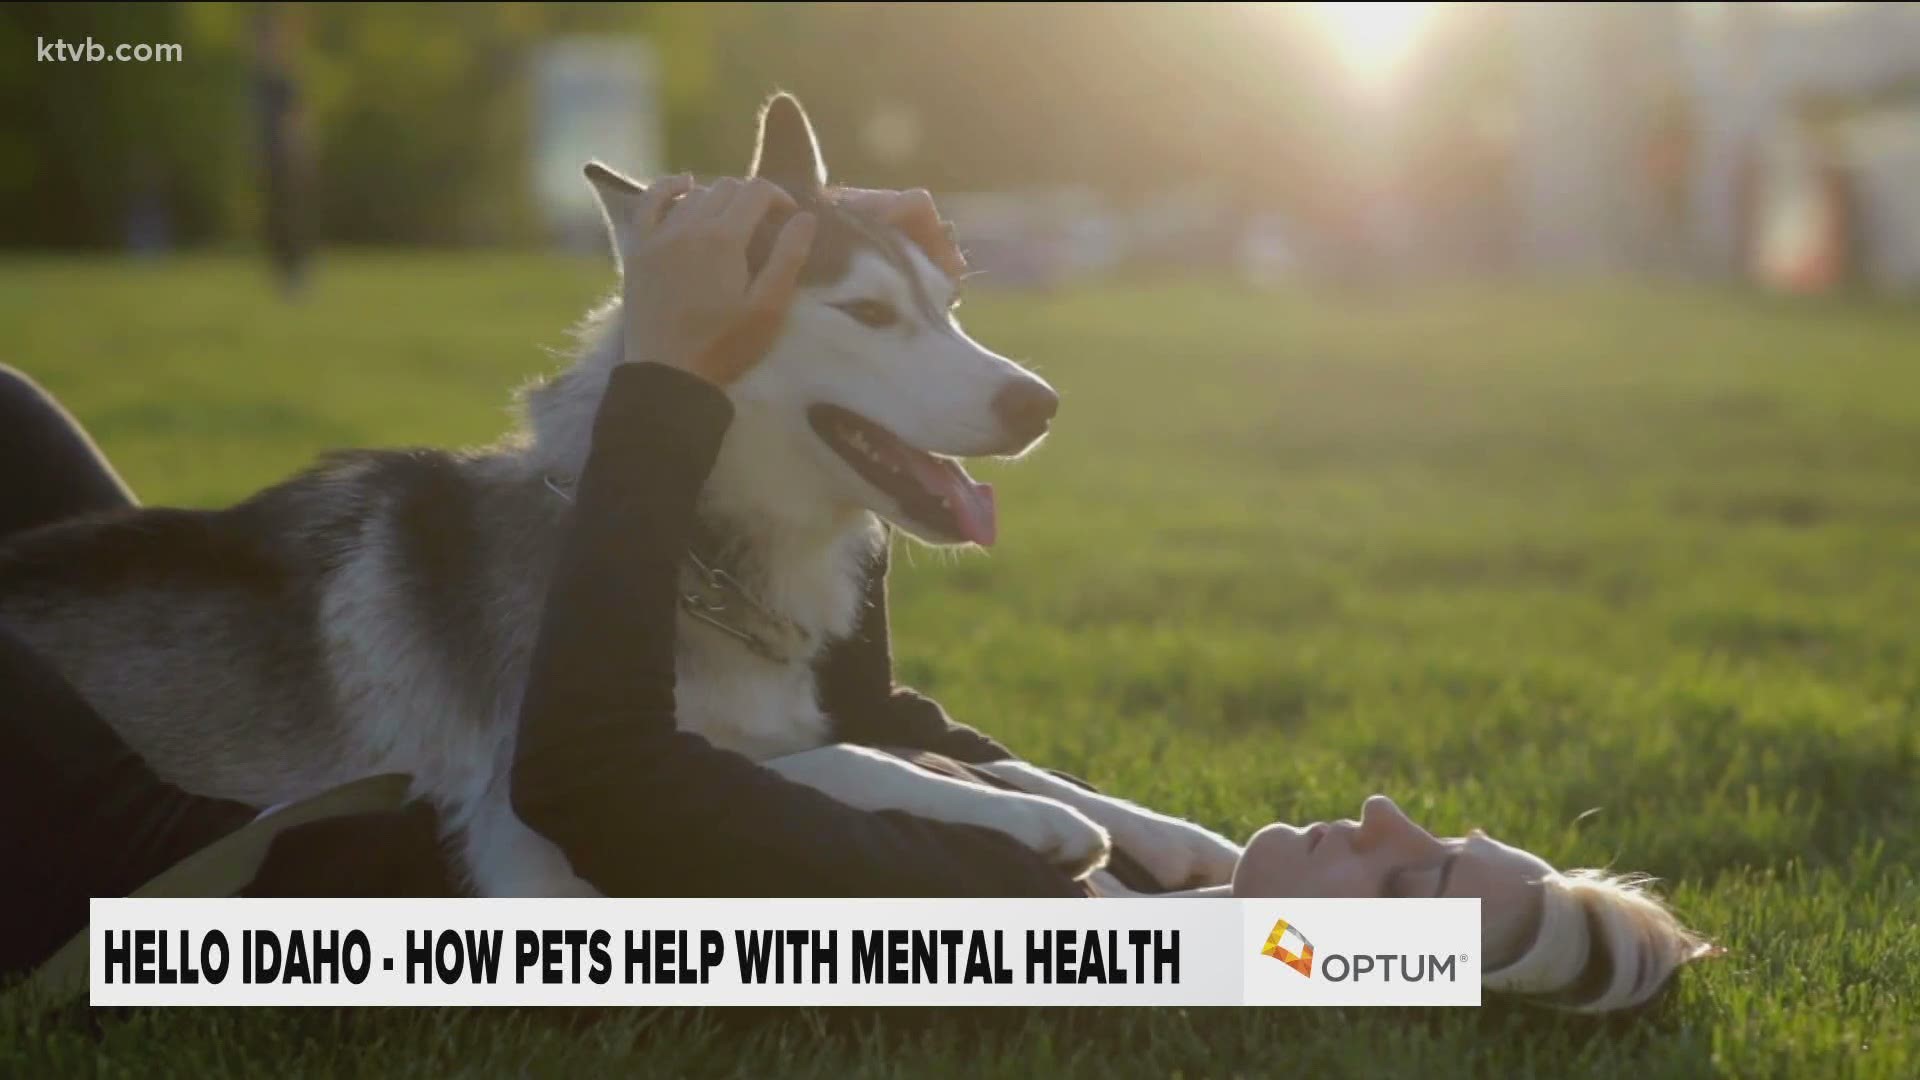 While it may not be with currency, pets actually have a way of repaying their owners: owning a pet can have significant benefits on your mental health.